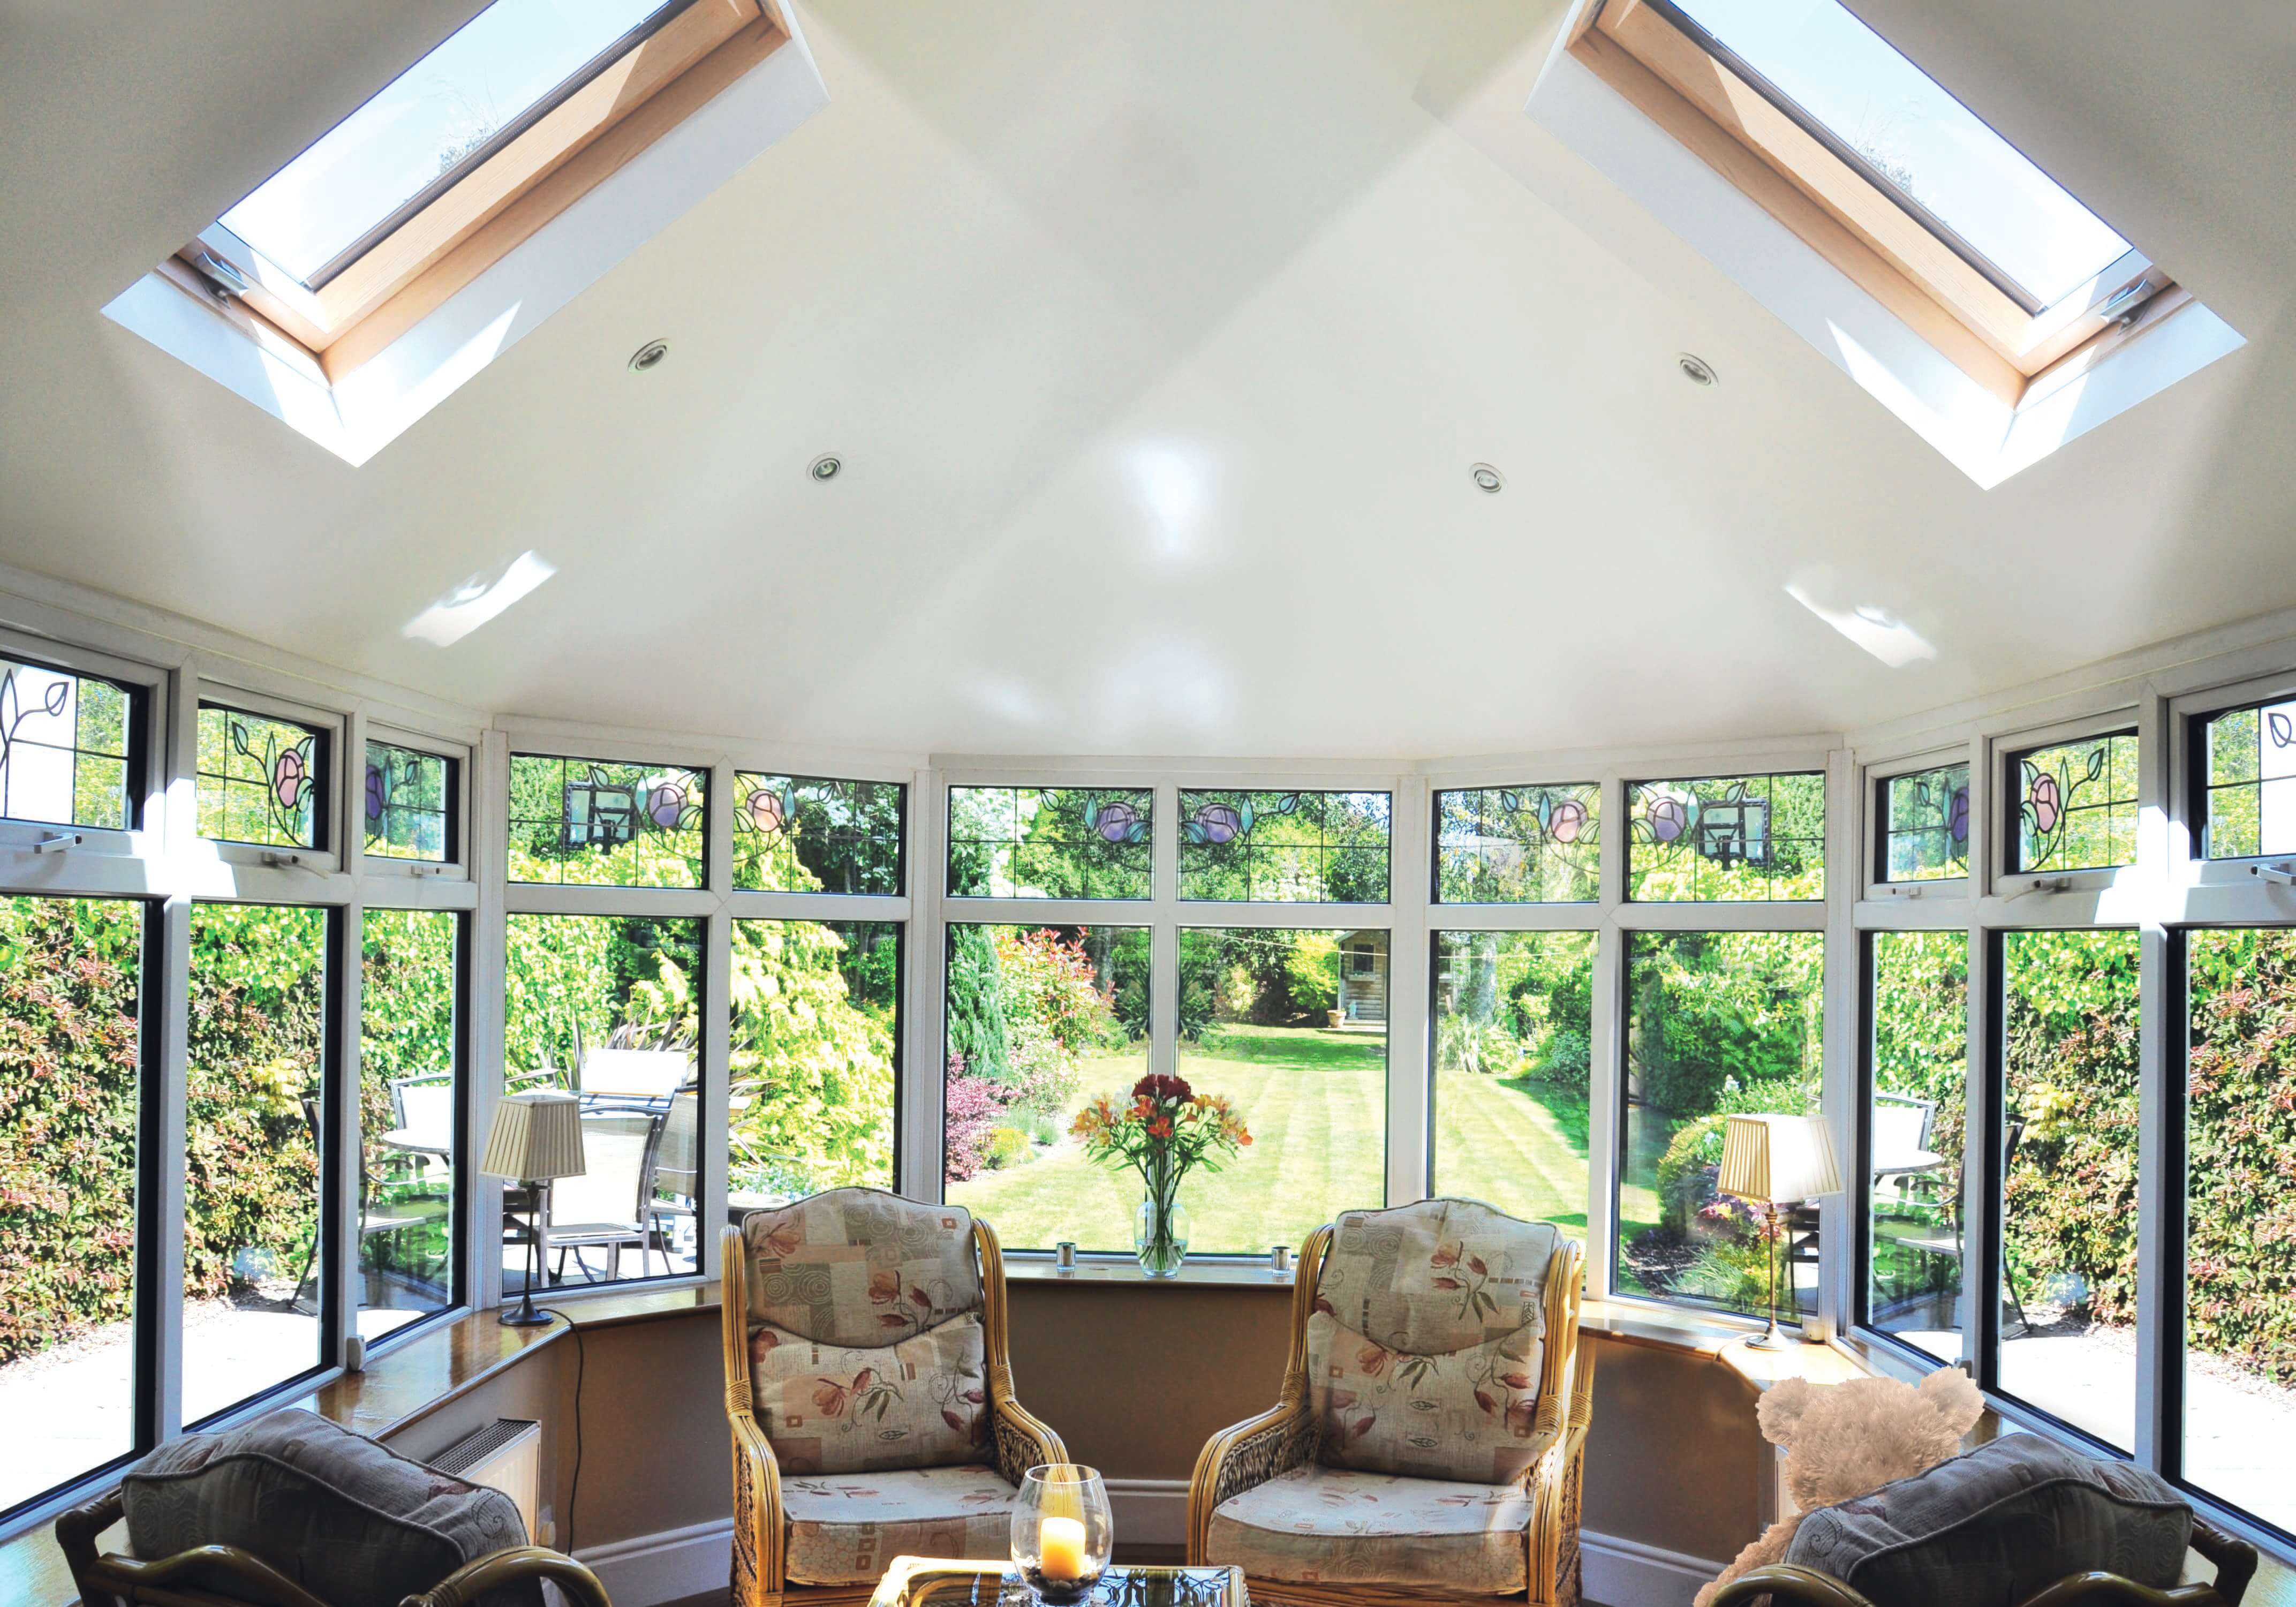 WARM CONSERVATORY ROOFS